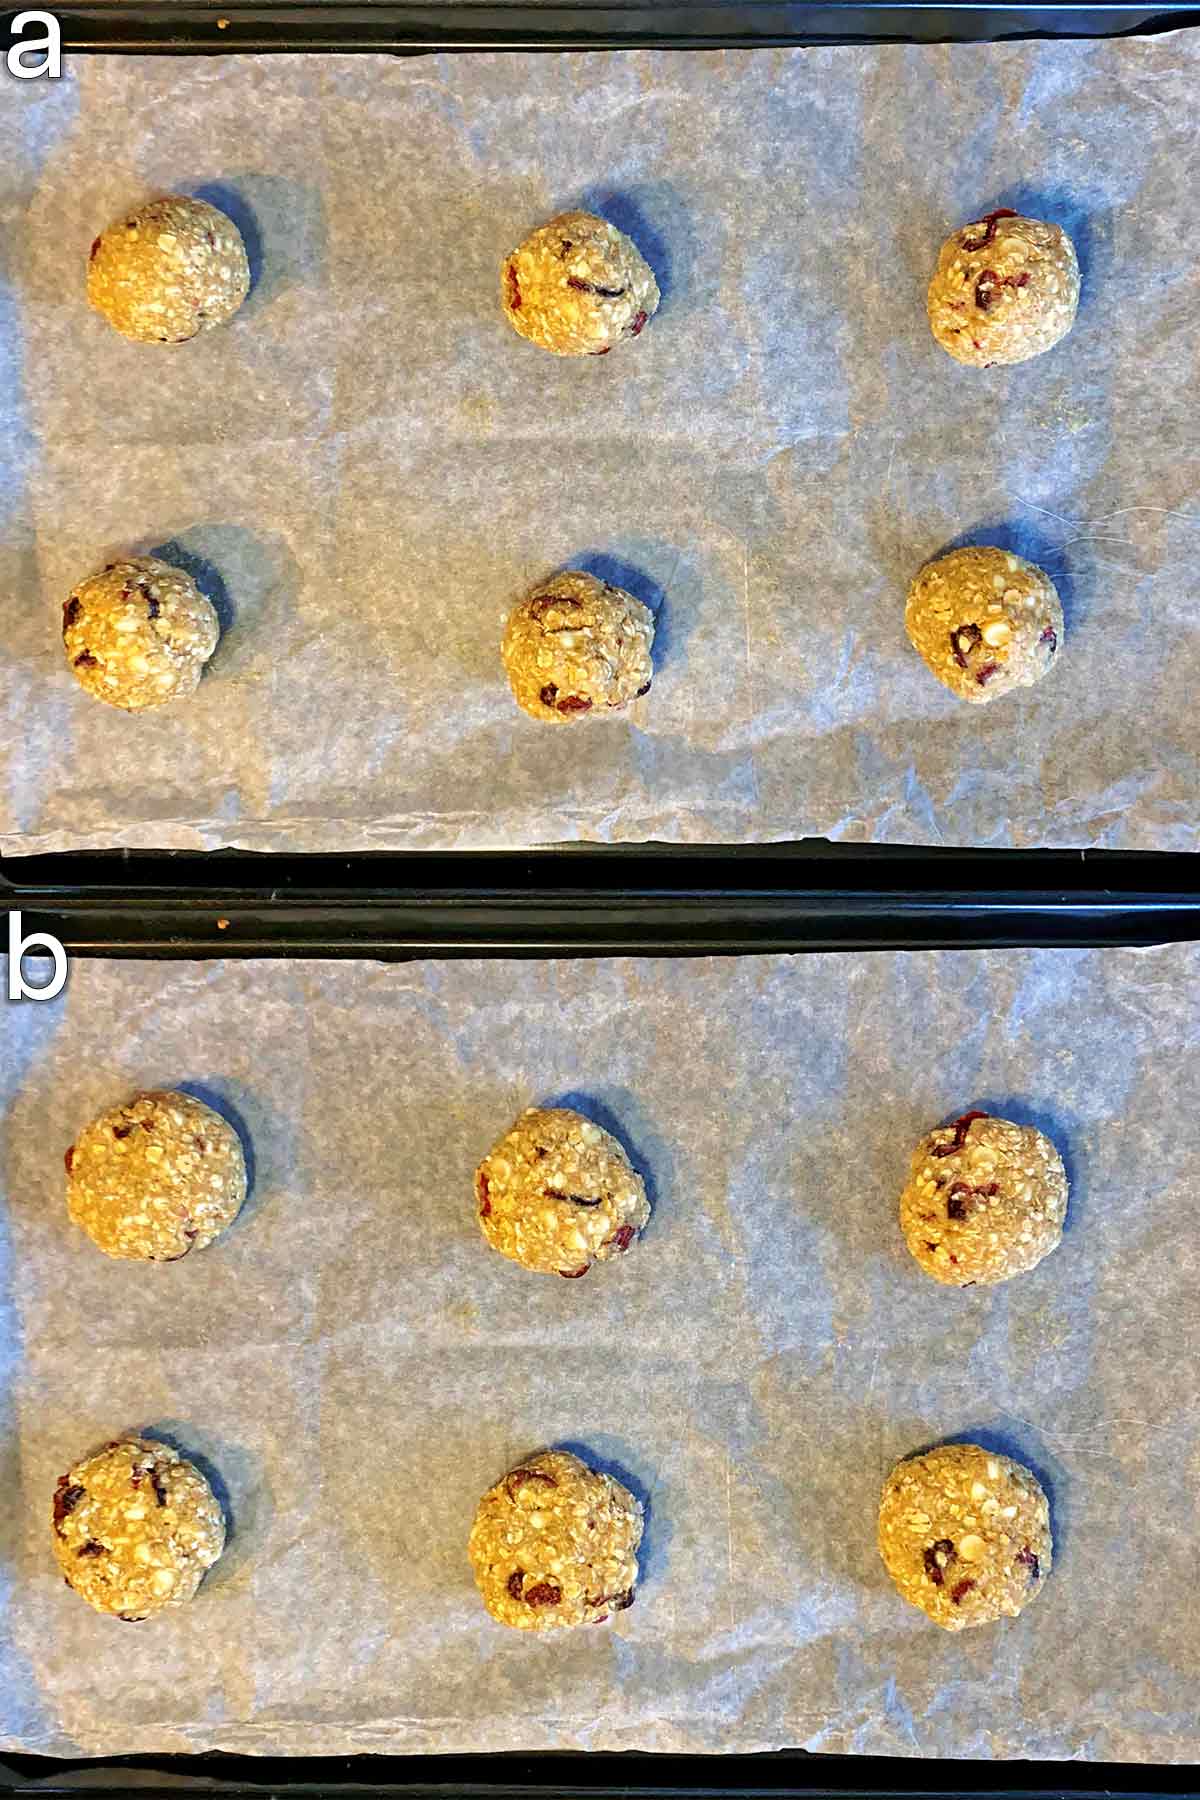 Balls of cookie dough on a baking tray and then slightly flattened.